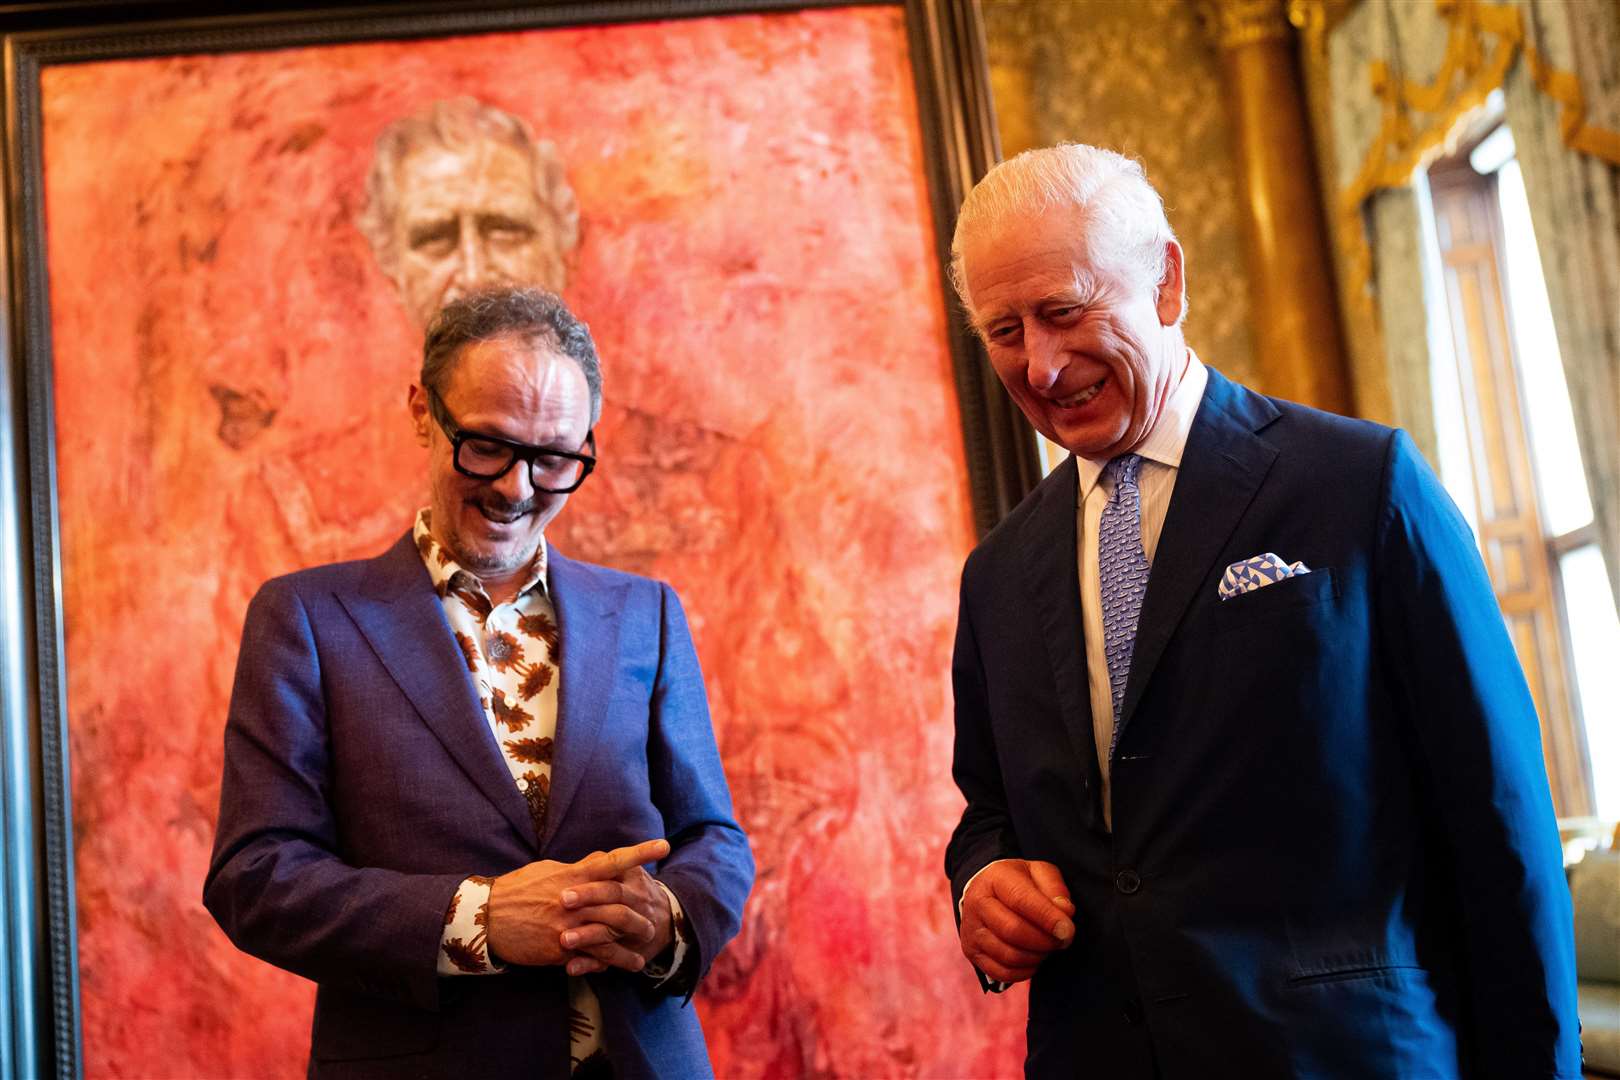 Artist Jonathan Yeo and the King during the unveiling (Aaron Chown/PA)